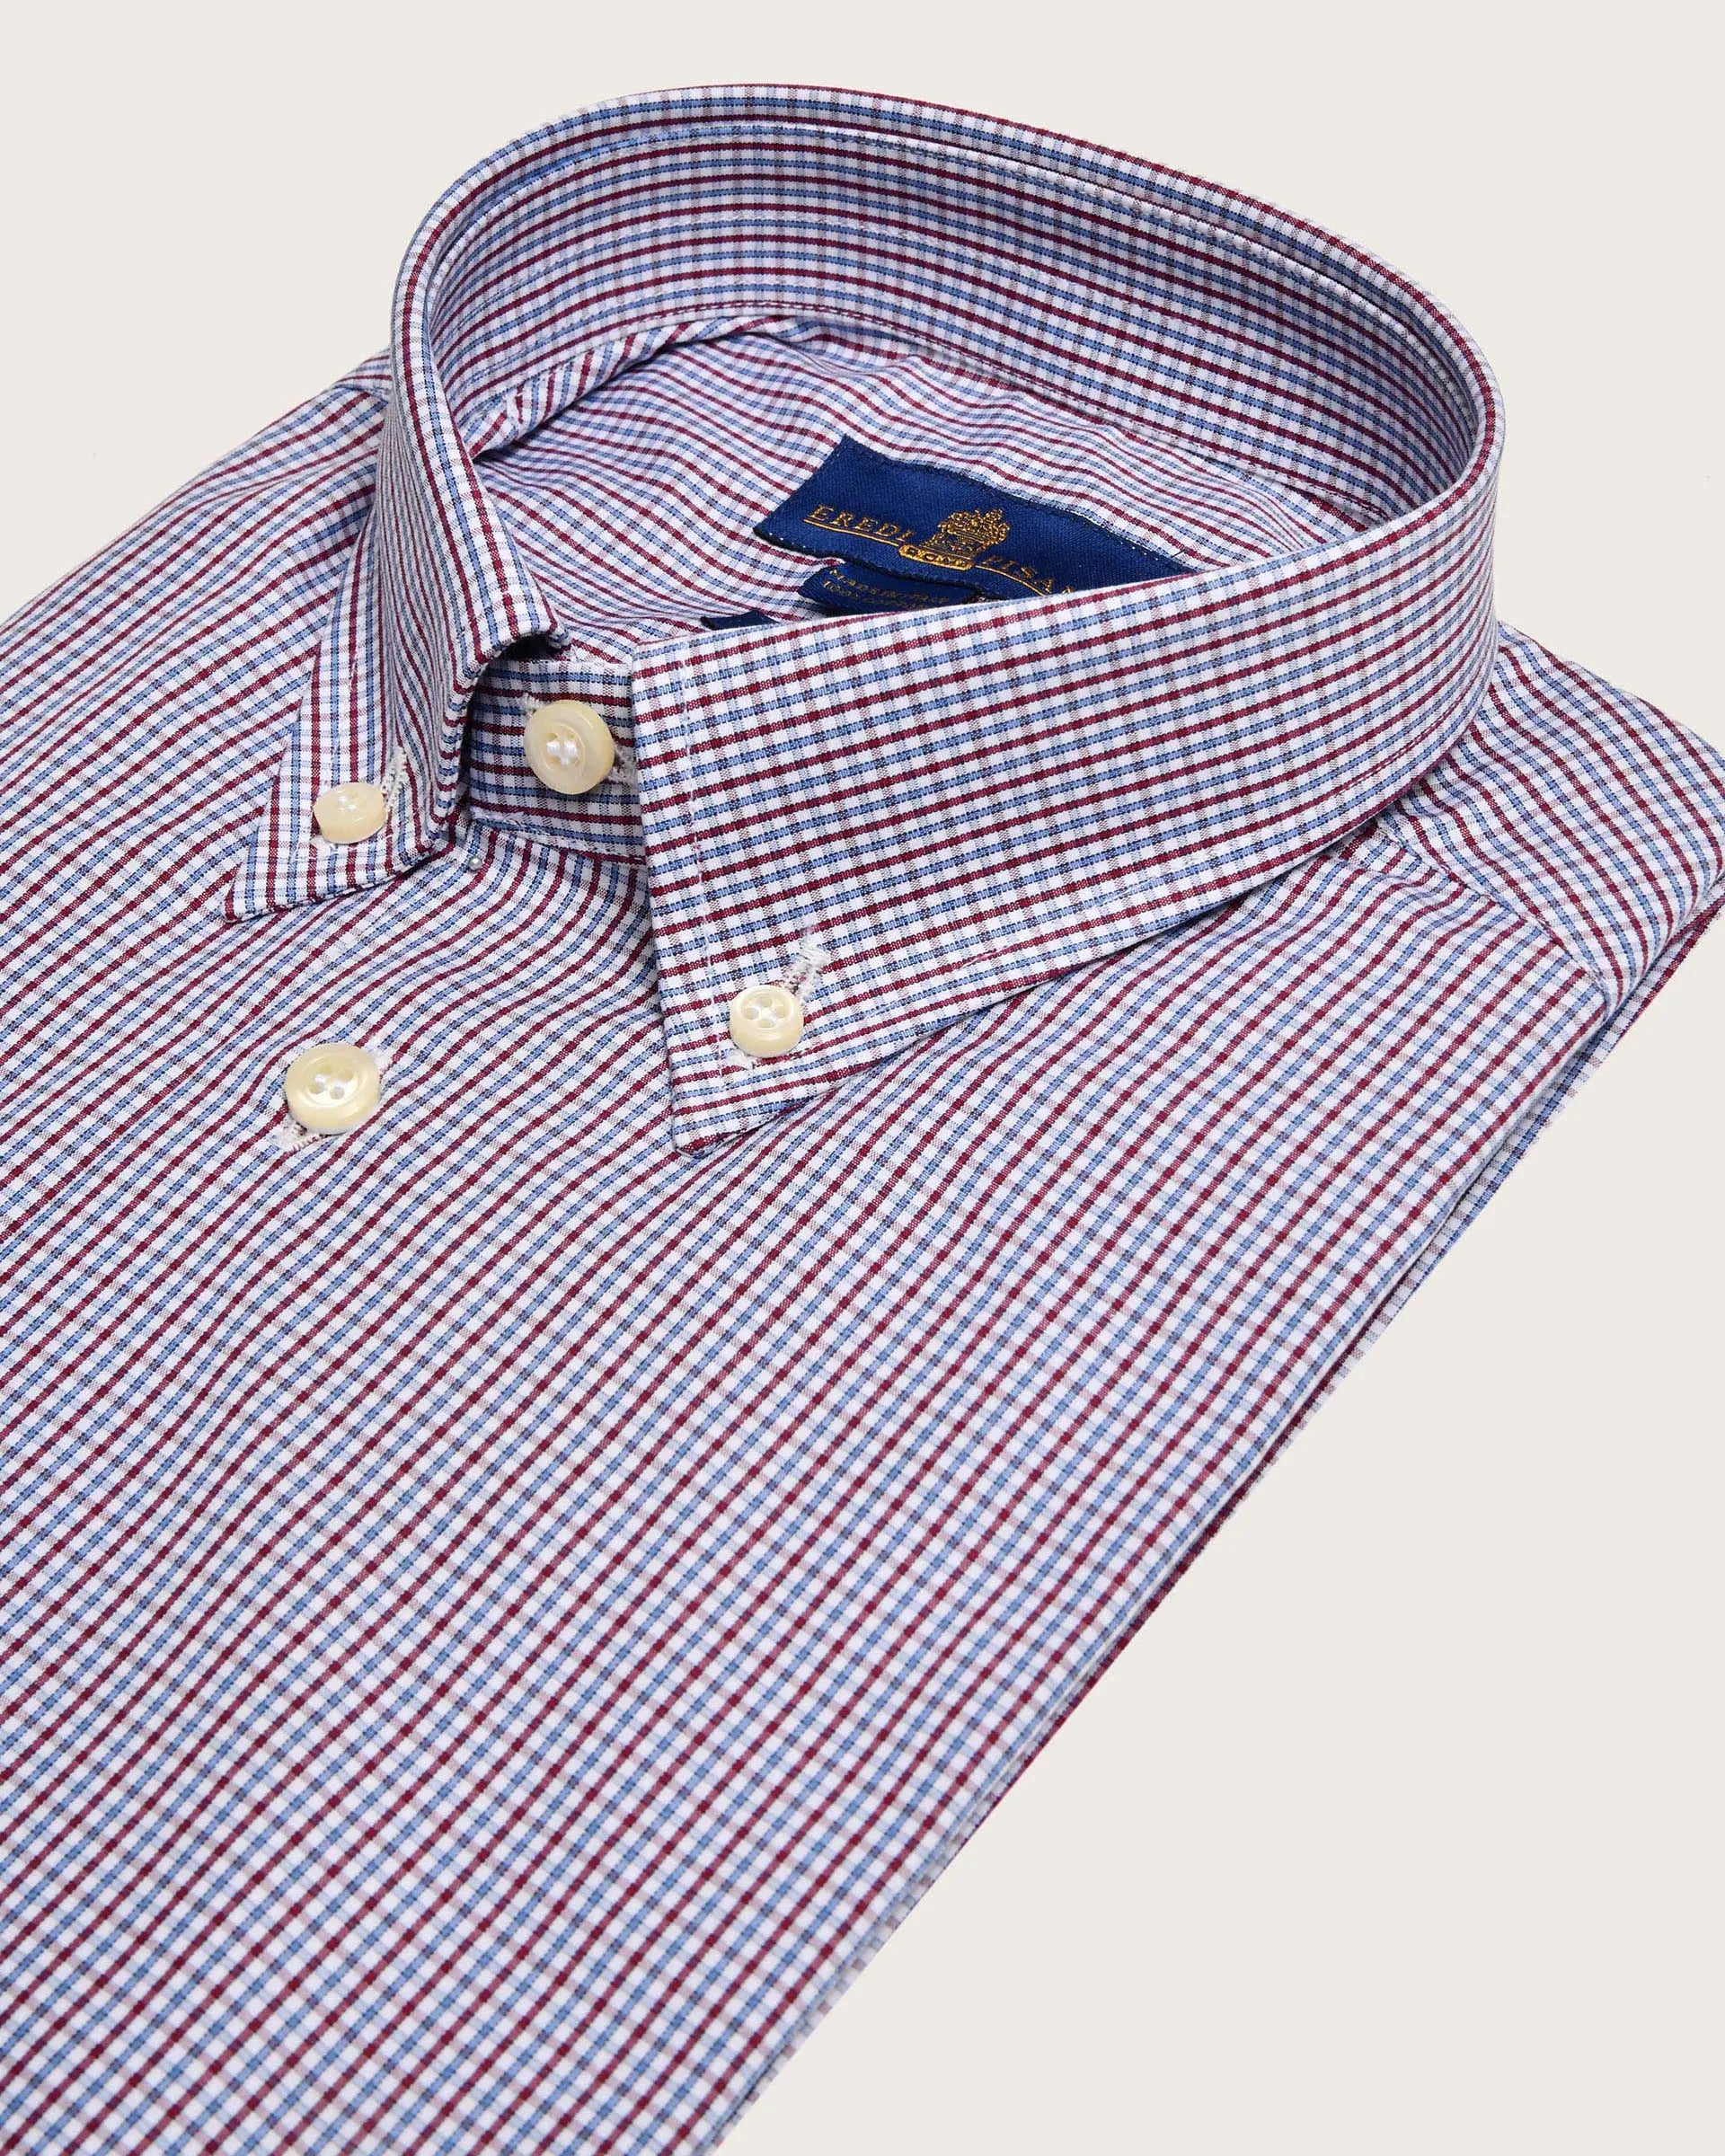 Regular fit microcheck shirt with button down collar